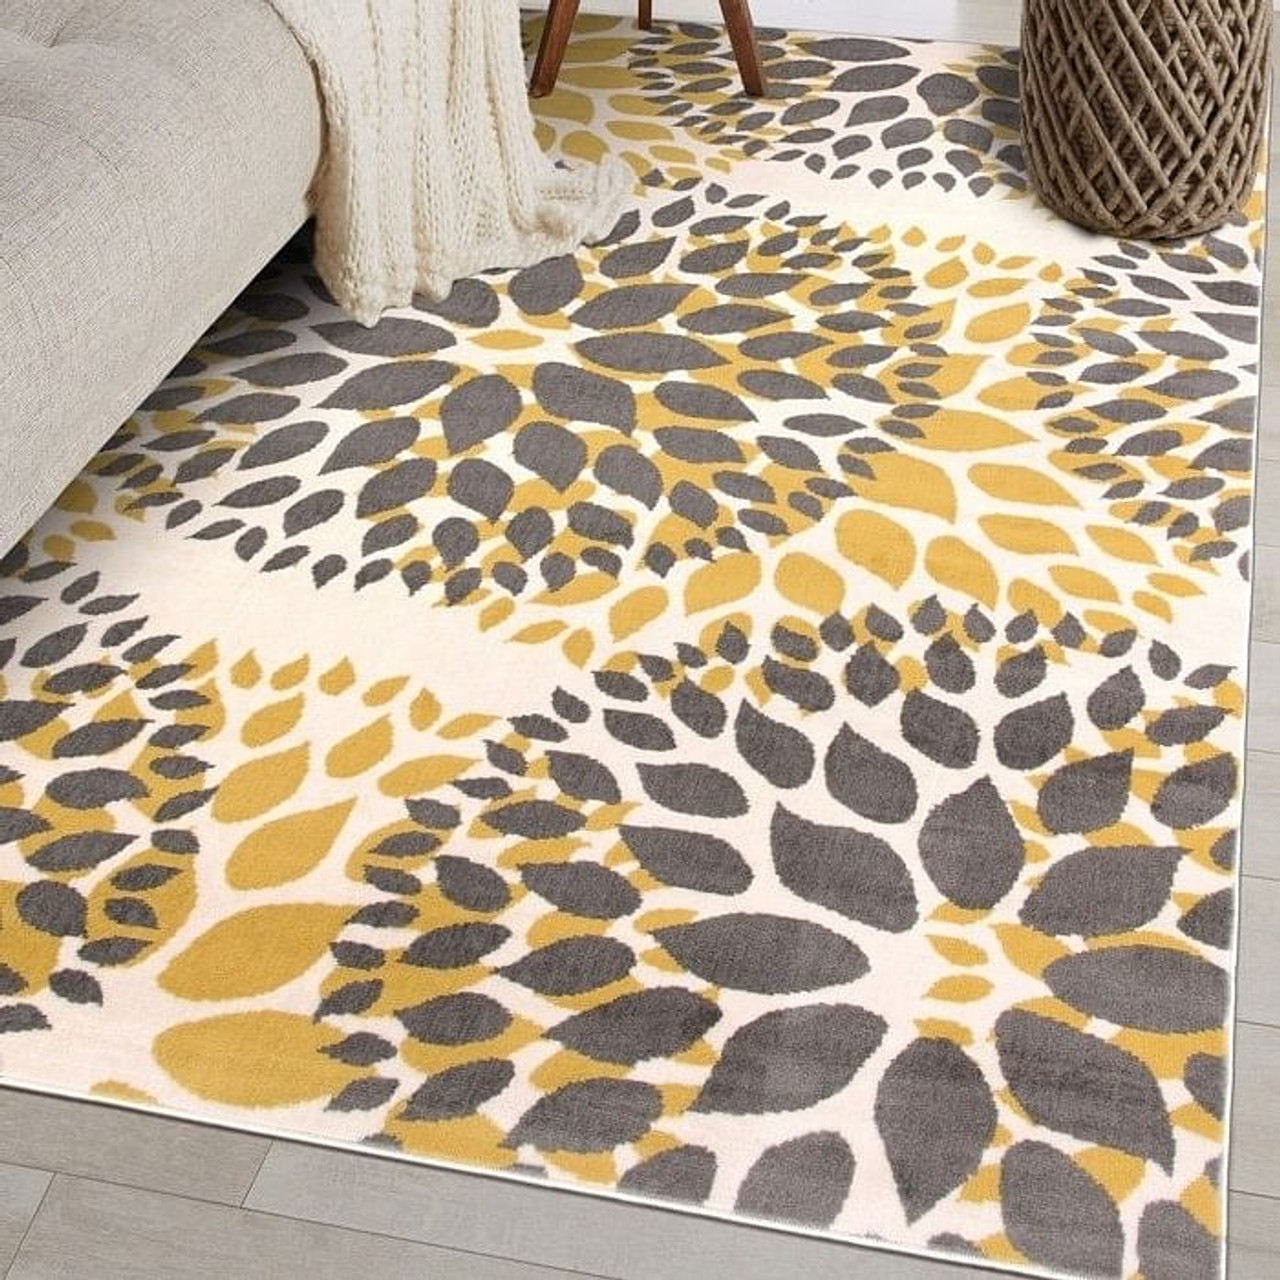 3'1" x 5' Grey Yellow Floral Woven Stain Resistant Polypropylene Area Rug